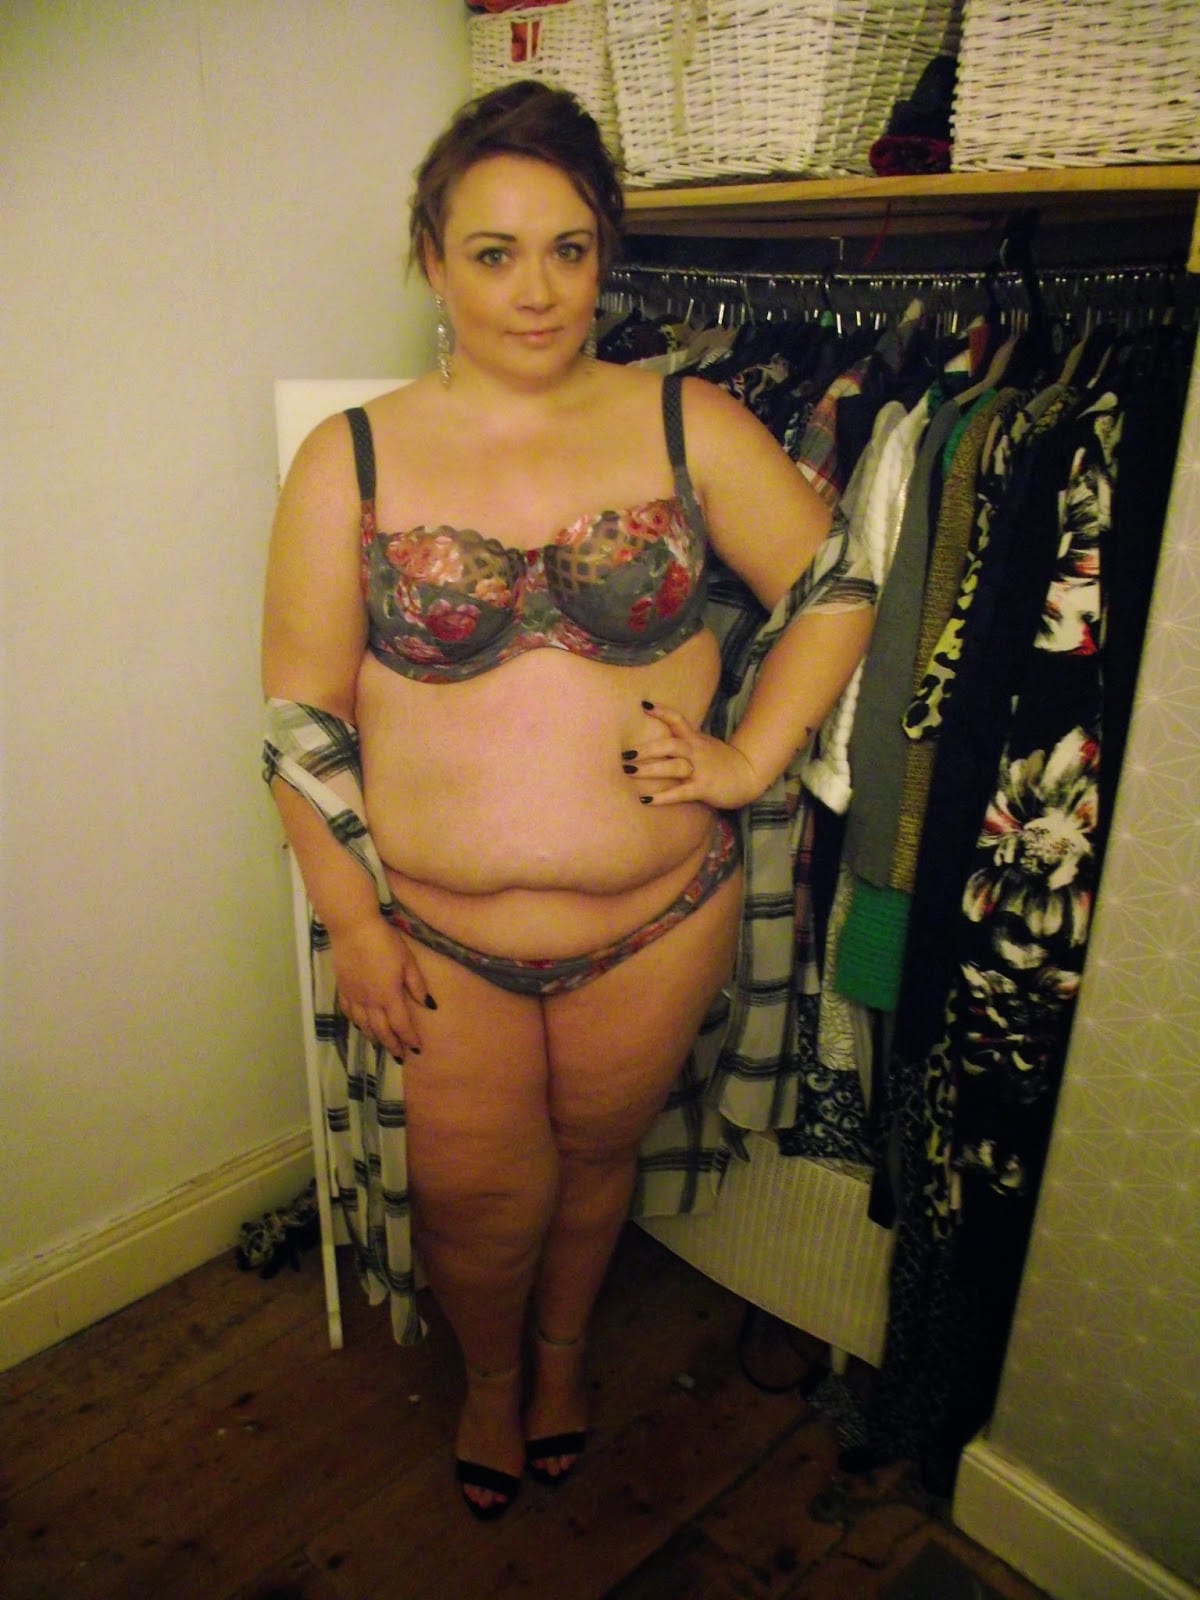 Curvy Lingerie- Mad about Curves